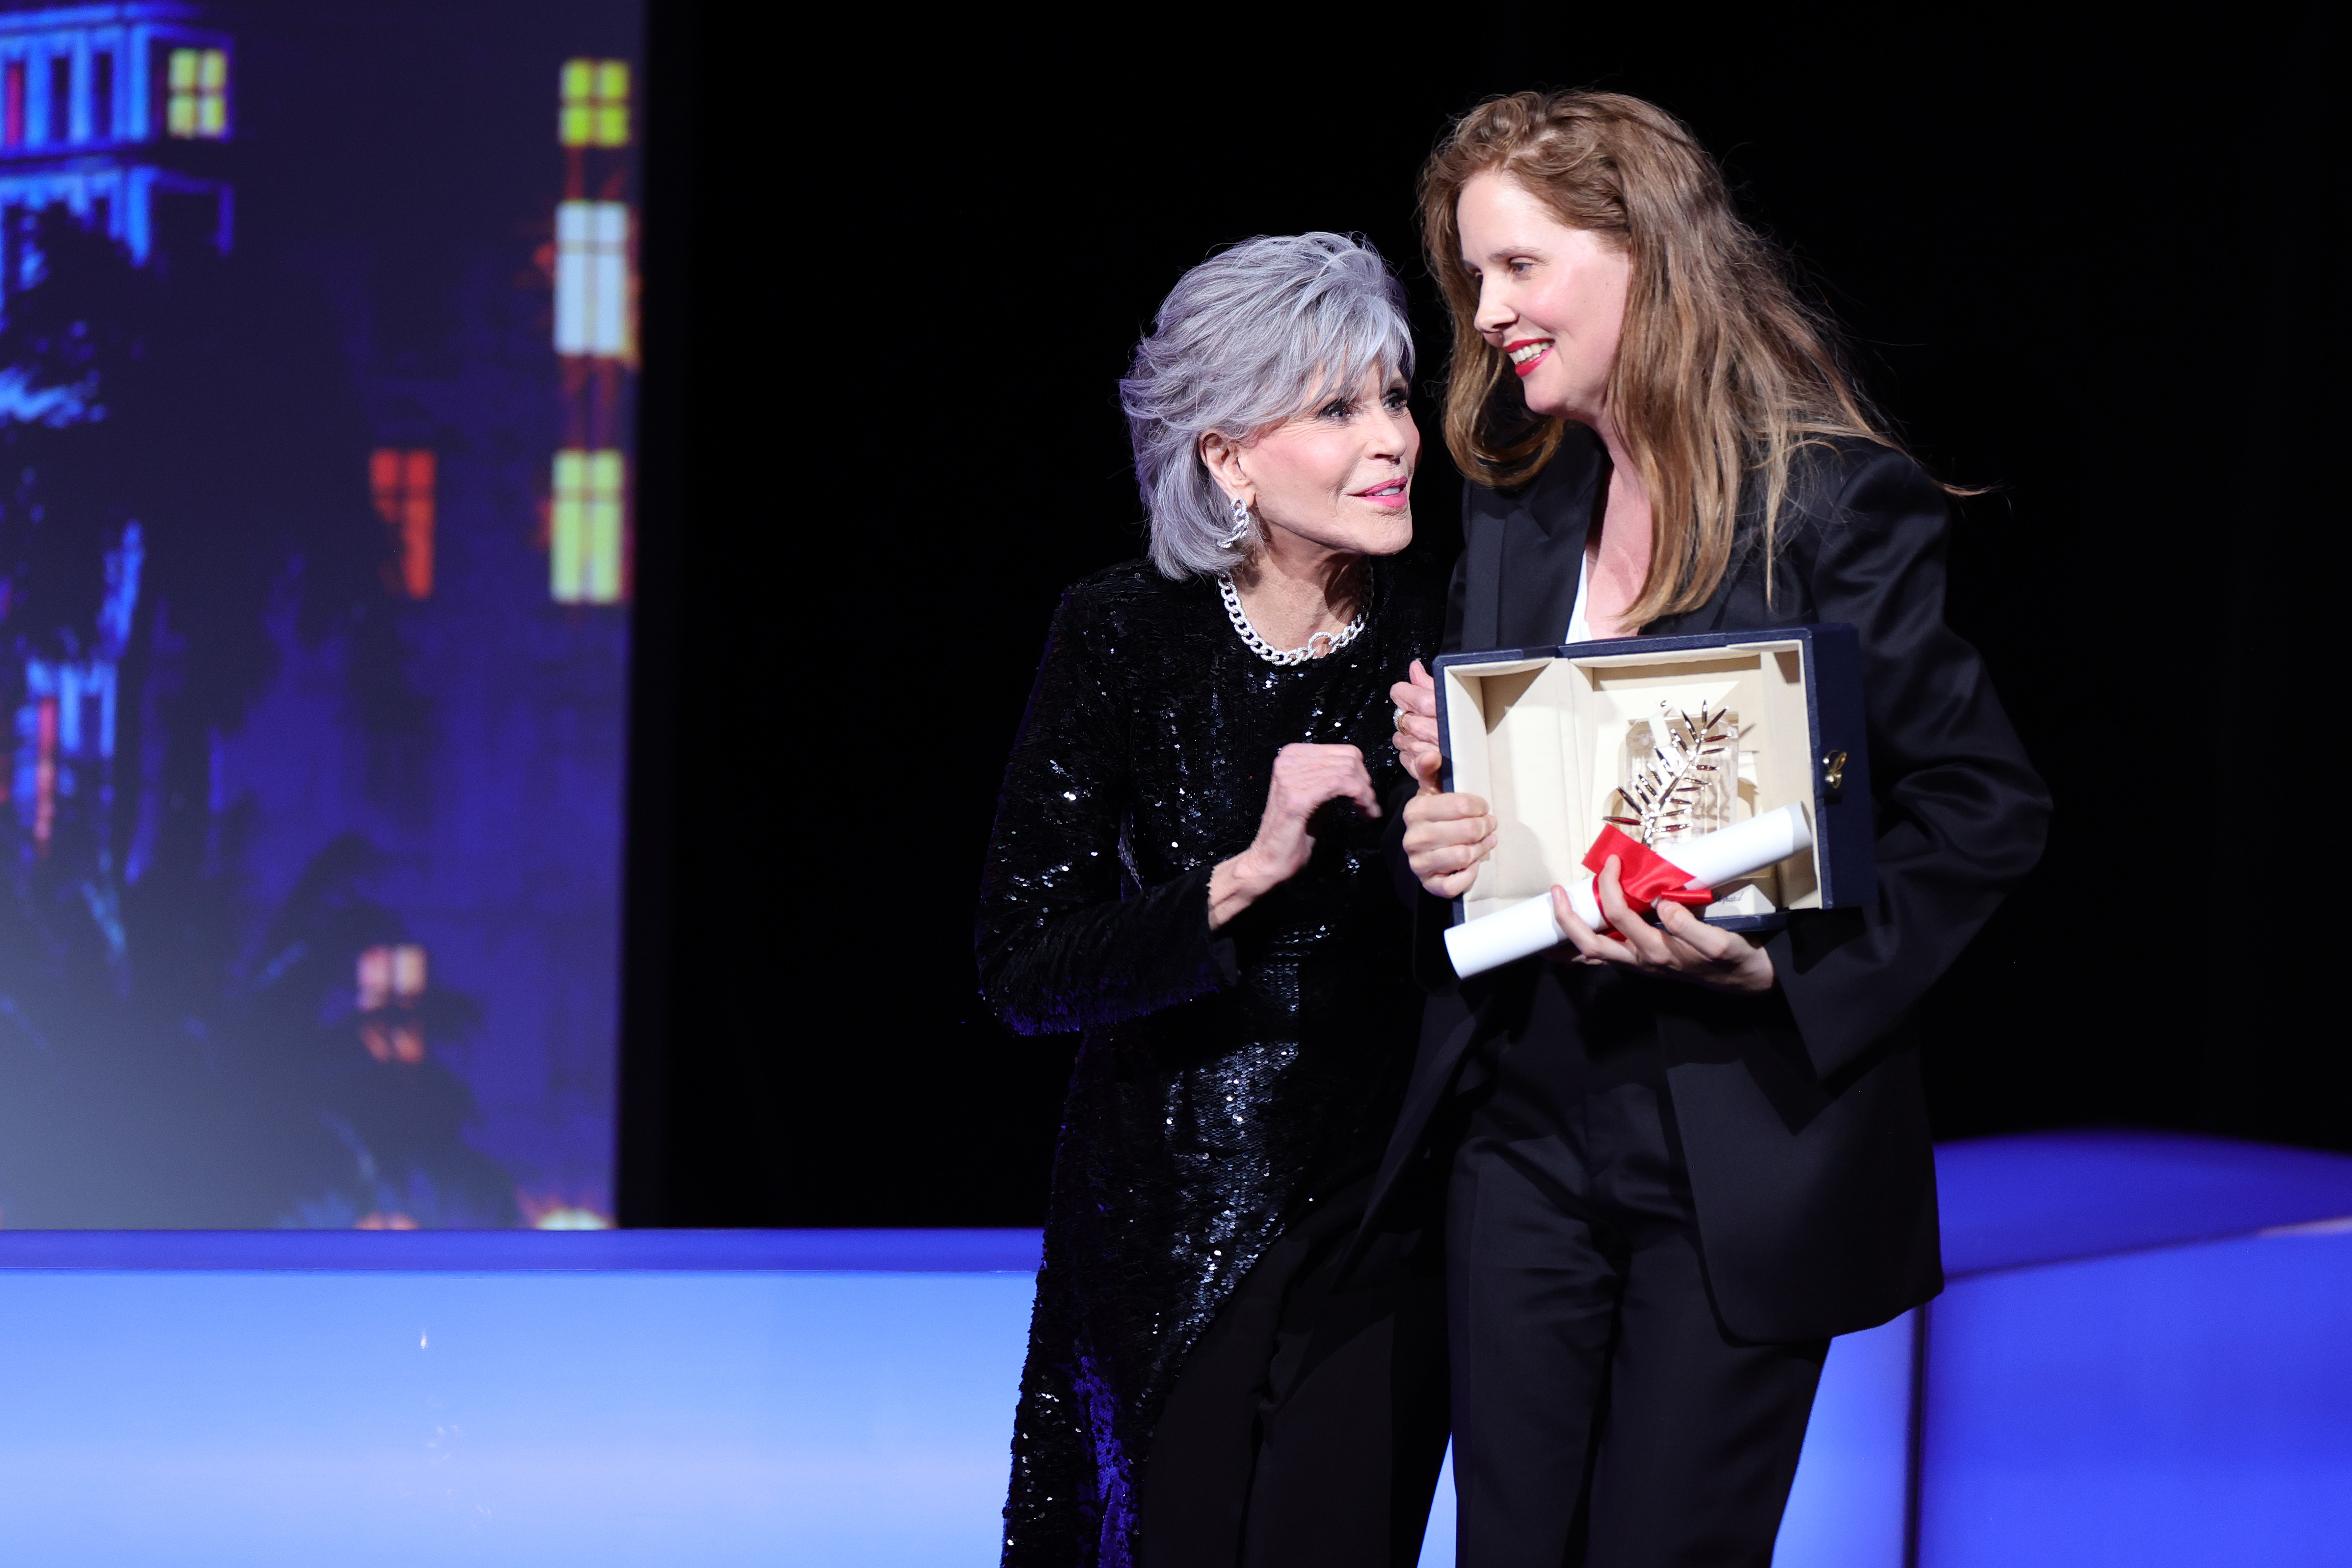 Justine Triet (R) receives The Palme D'Or Award for 'Anatomy of a Fall' from Jane Fonda (L) during the closing ceremony of the 76th annual Cannes Film Festival at Palais des Festivals on May 27, 2023 in Cannes, France | Source: Getty Images